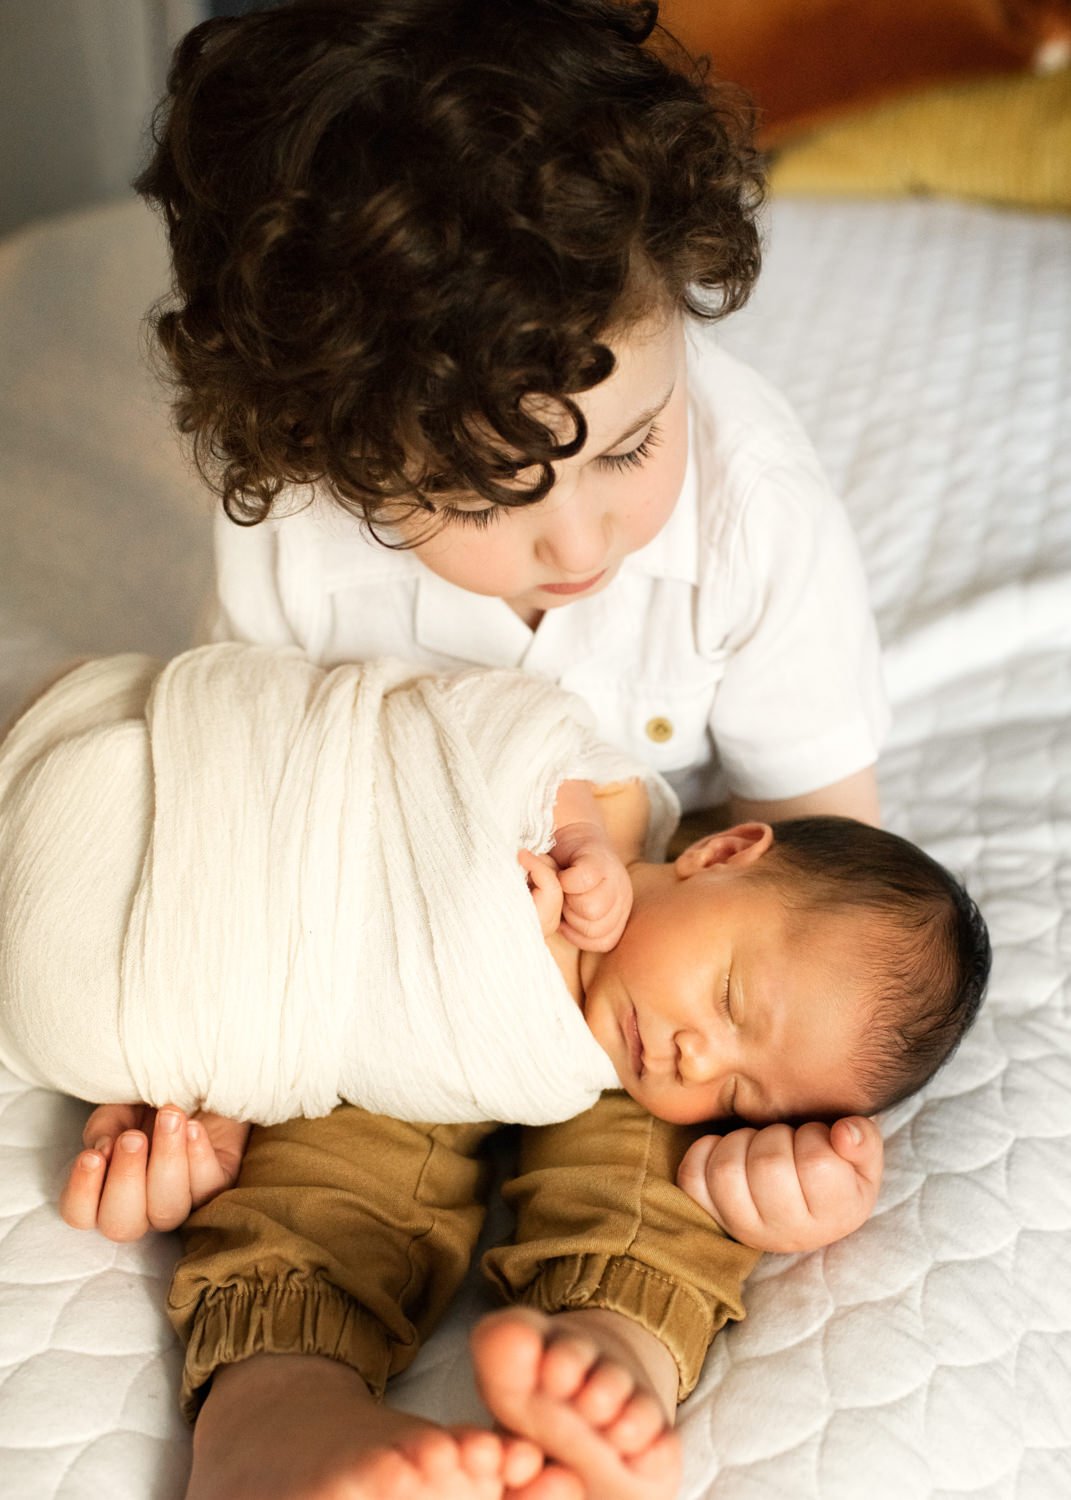 Newborn and Sibling Photo Ideas